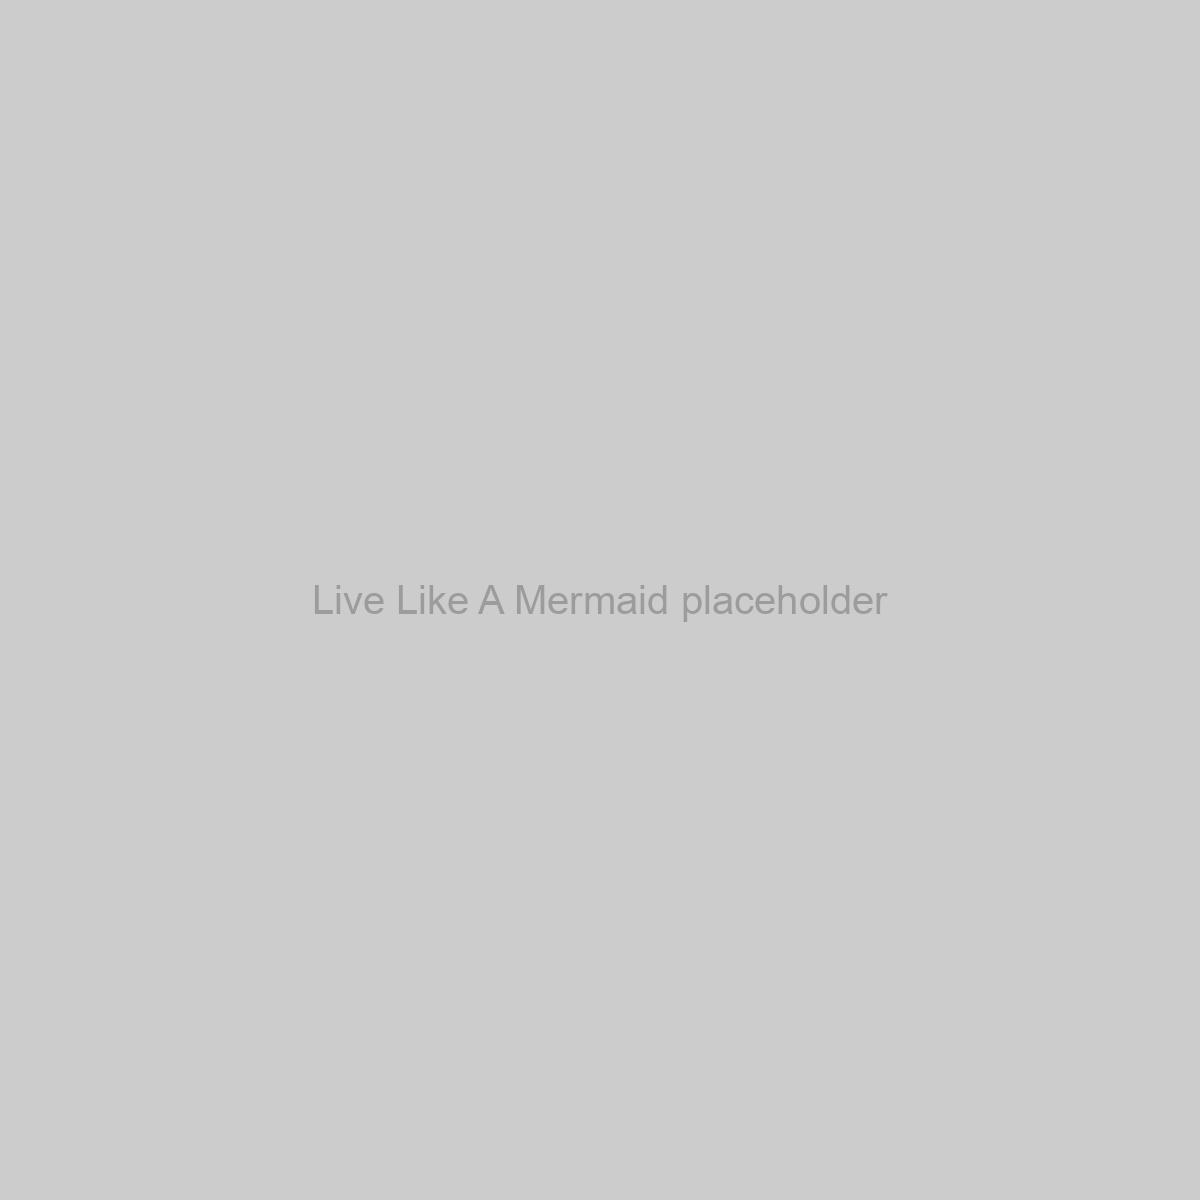 Live Like A Mermaid Placeholder Image